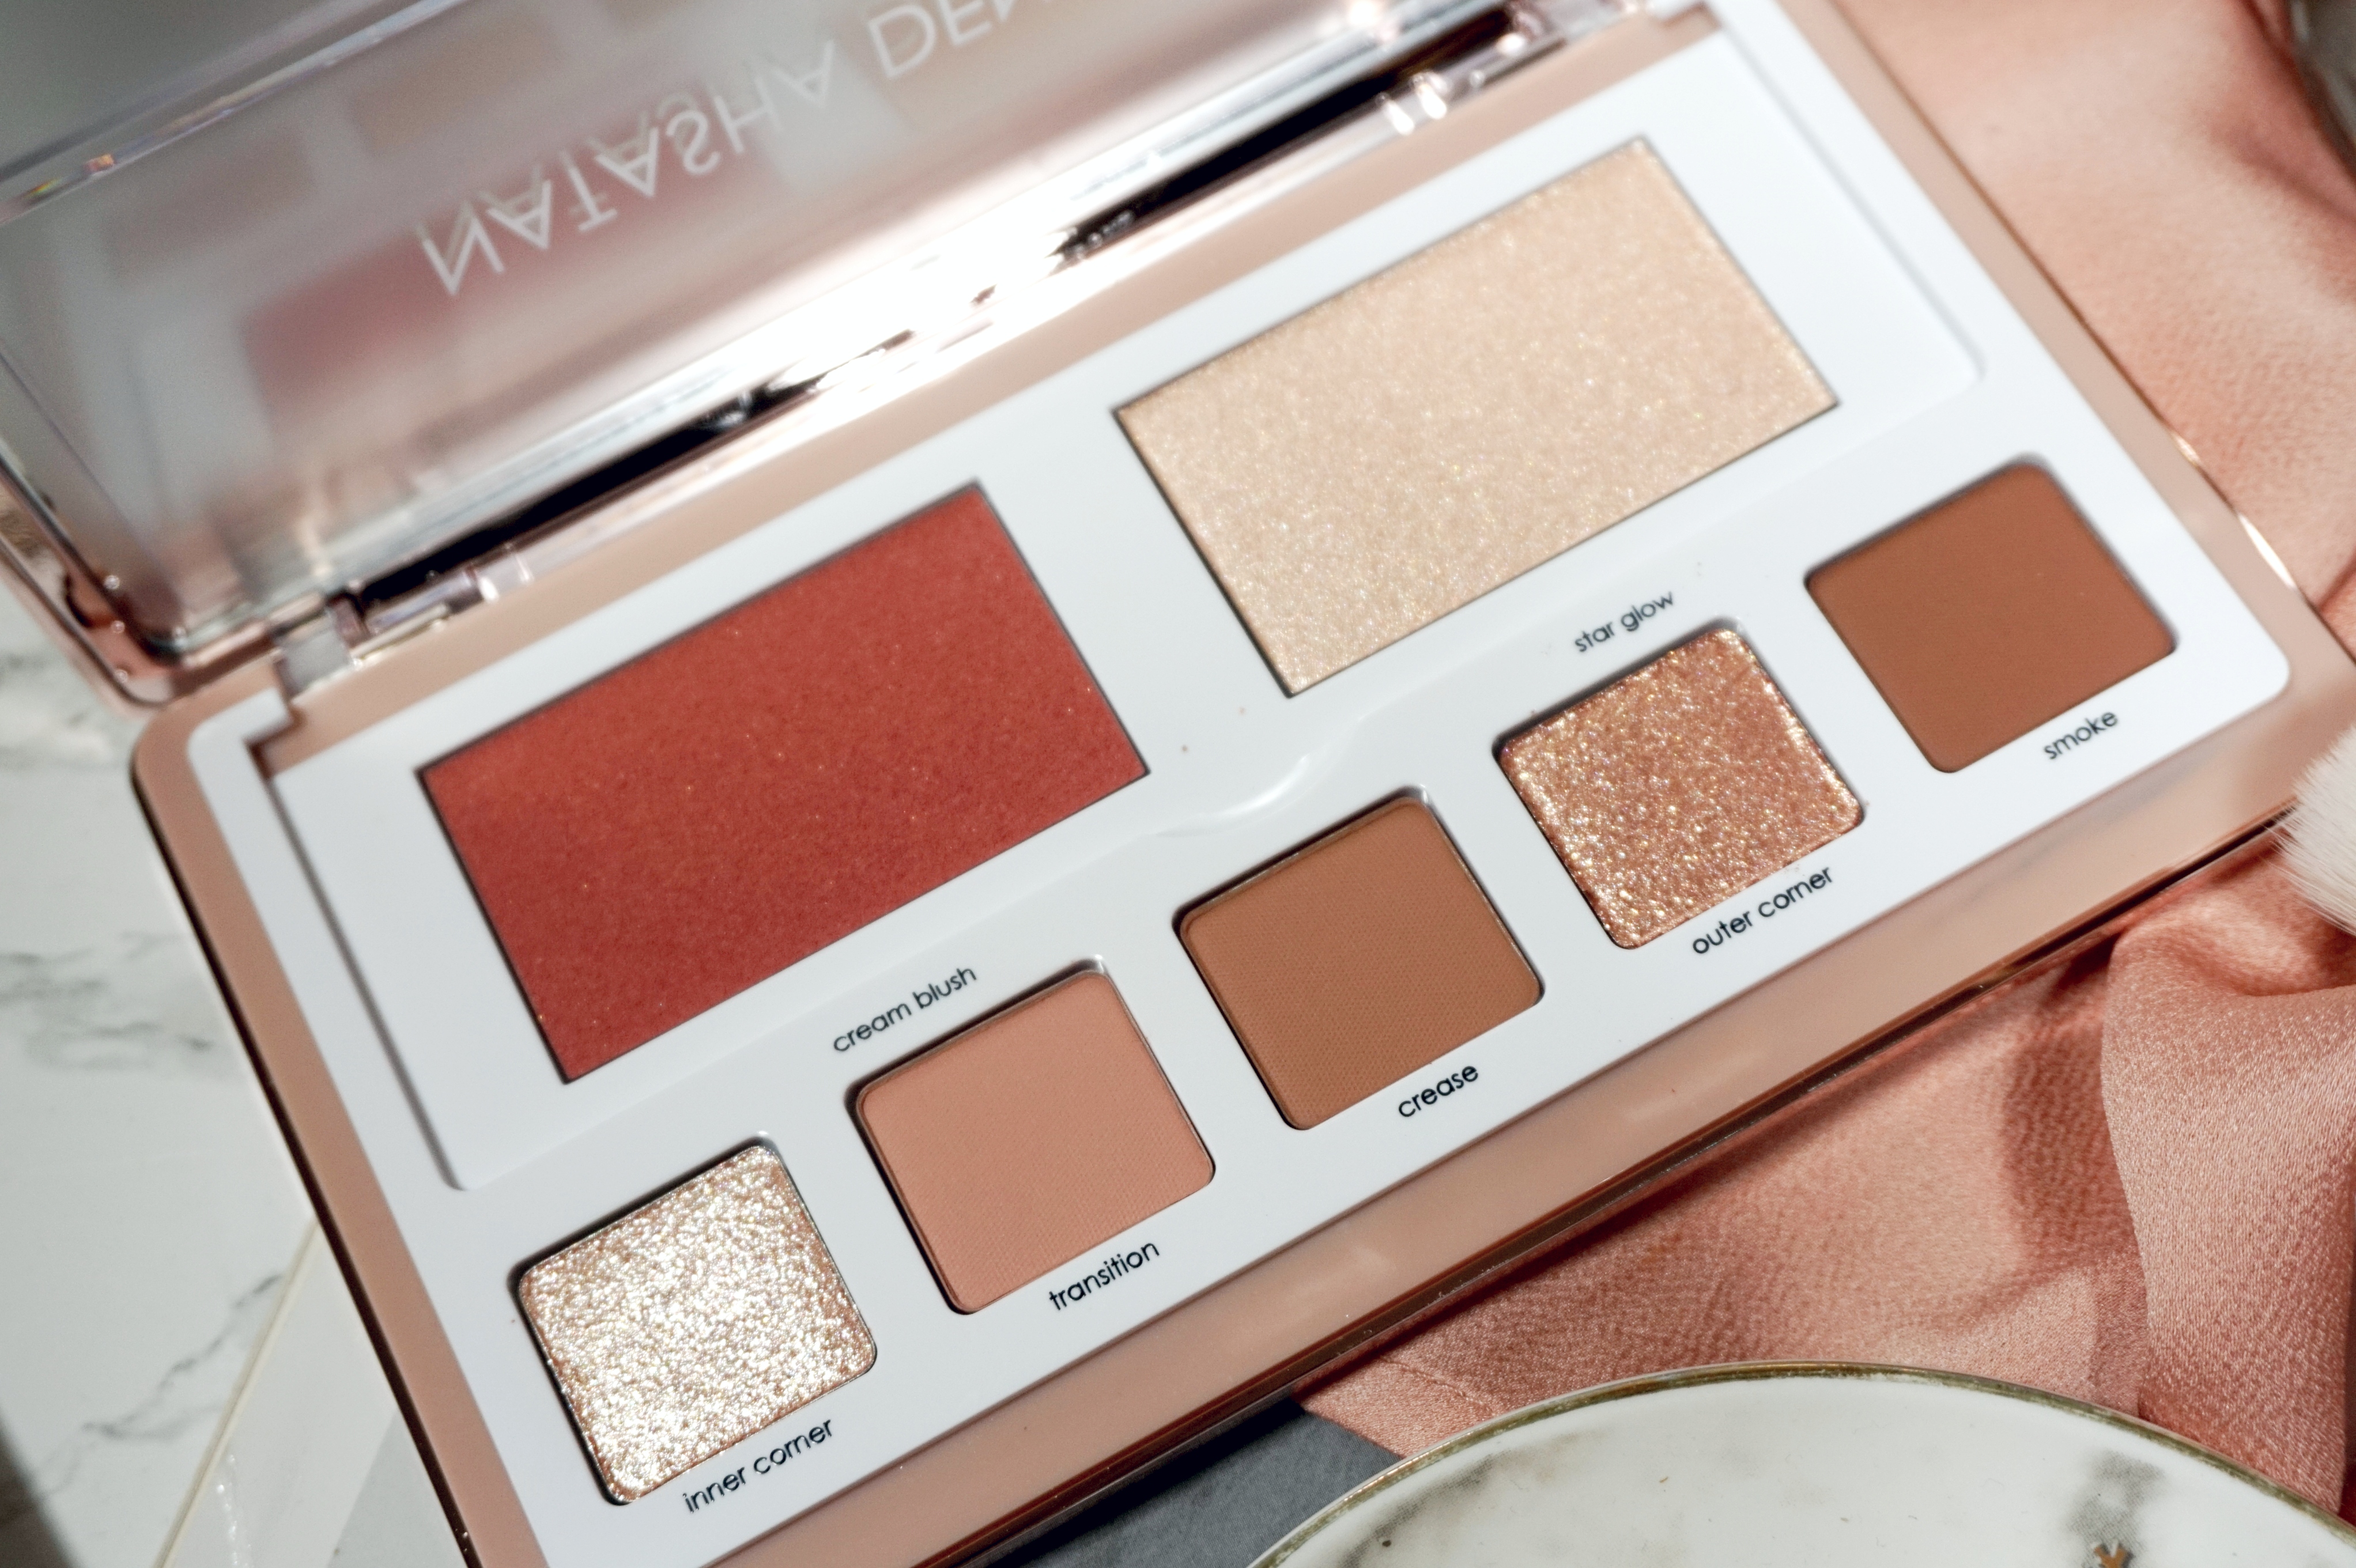 Natasha Denona Glam Face & Eye Palette - Light Review and Swatches